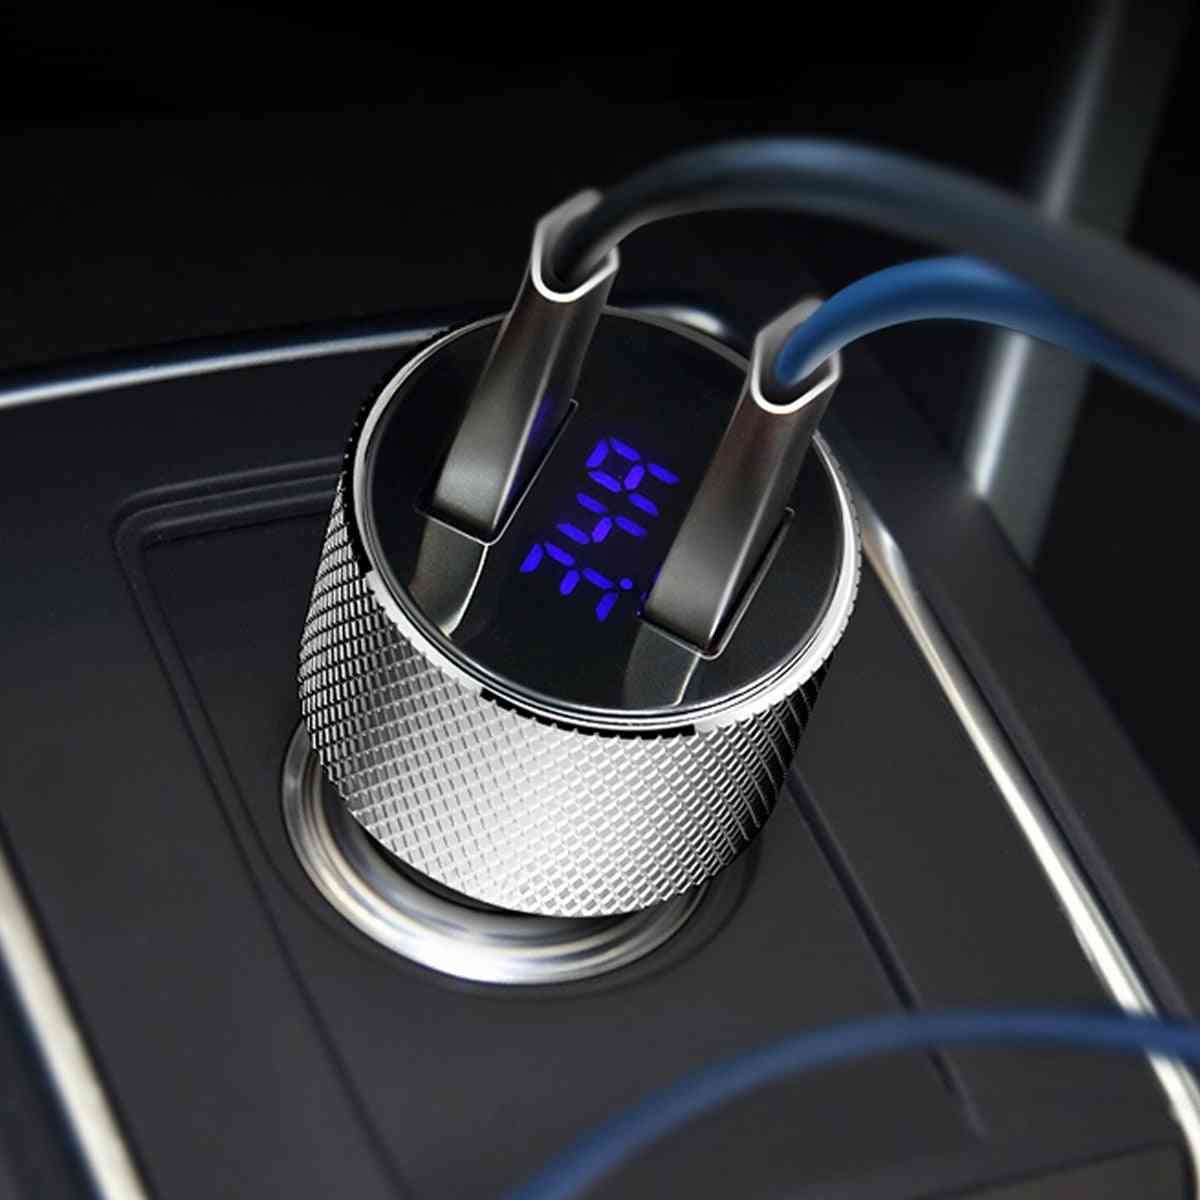 Digital Display- Usb Car Charger For Mobile Phone